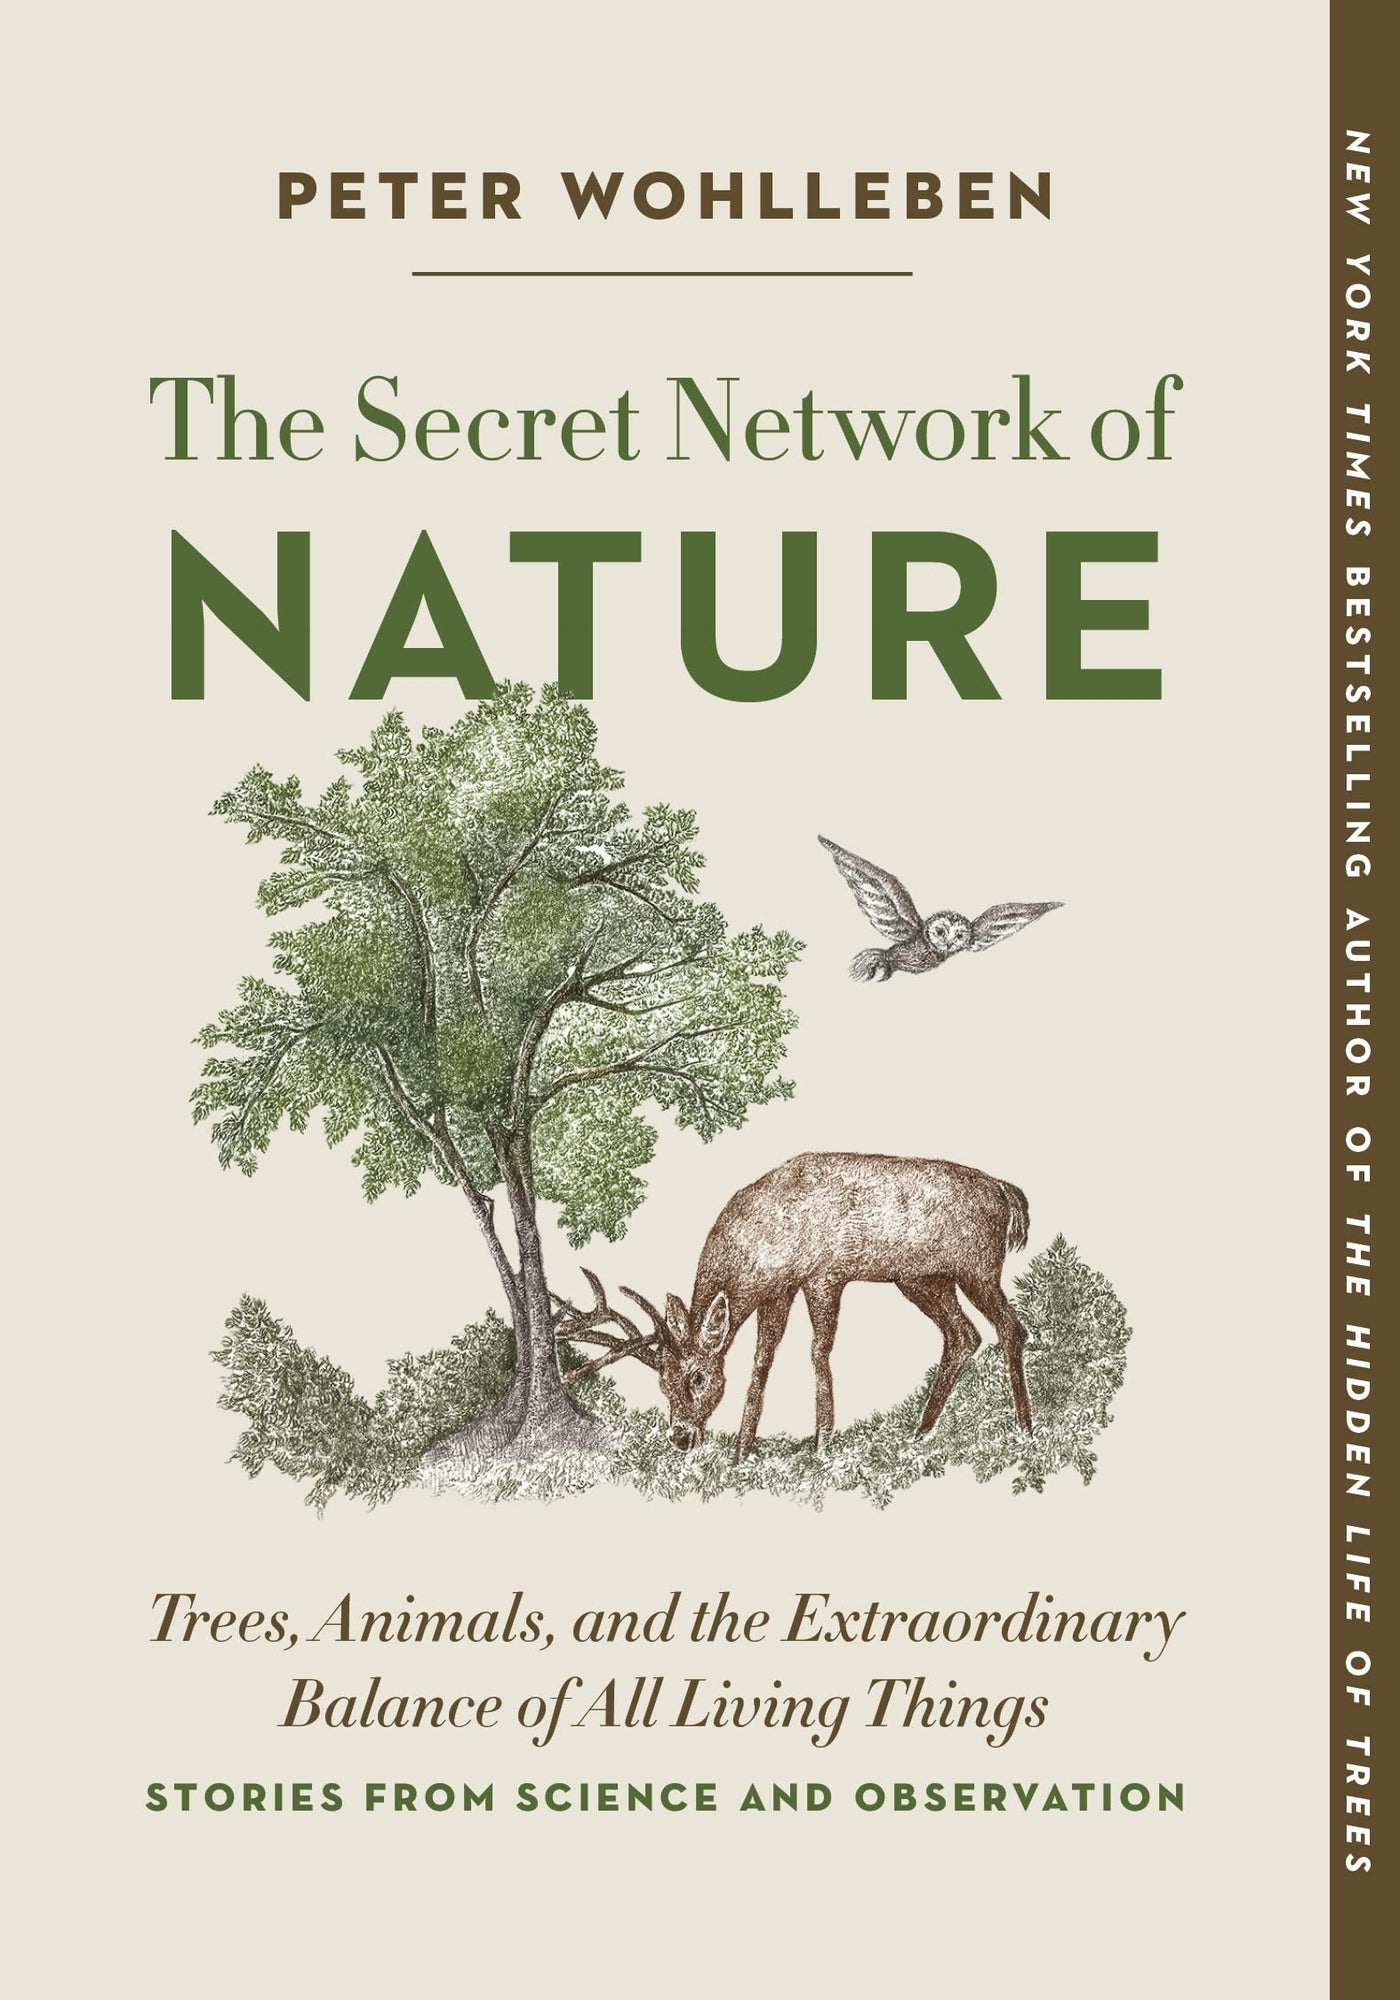 The Secret Network of Nature: Trees, Animals, and the Extraordinary Balance of All Living Things